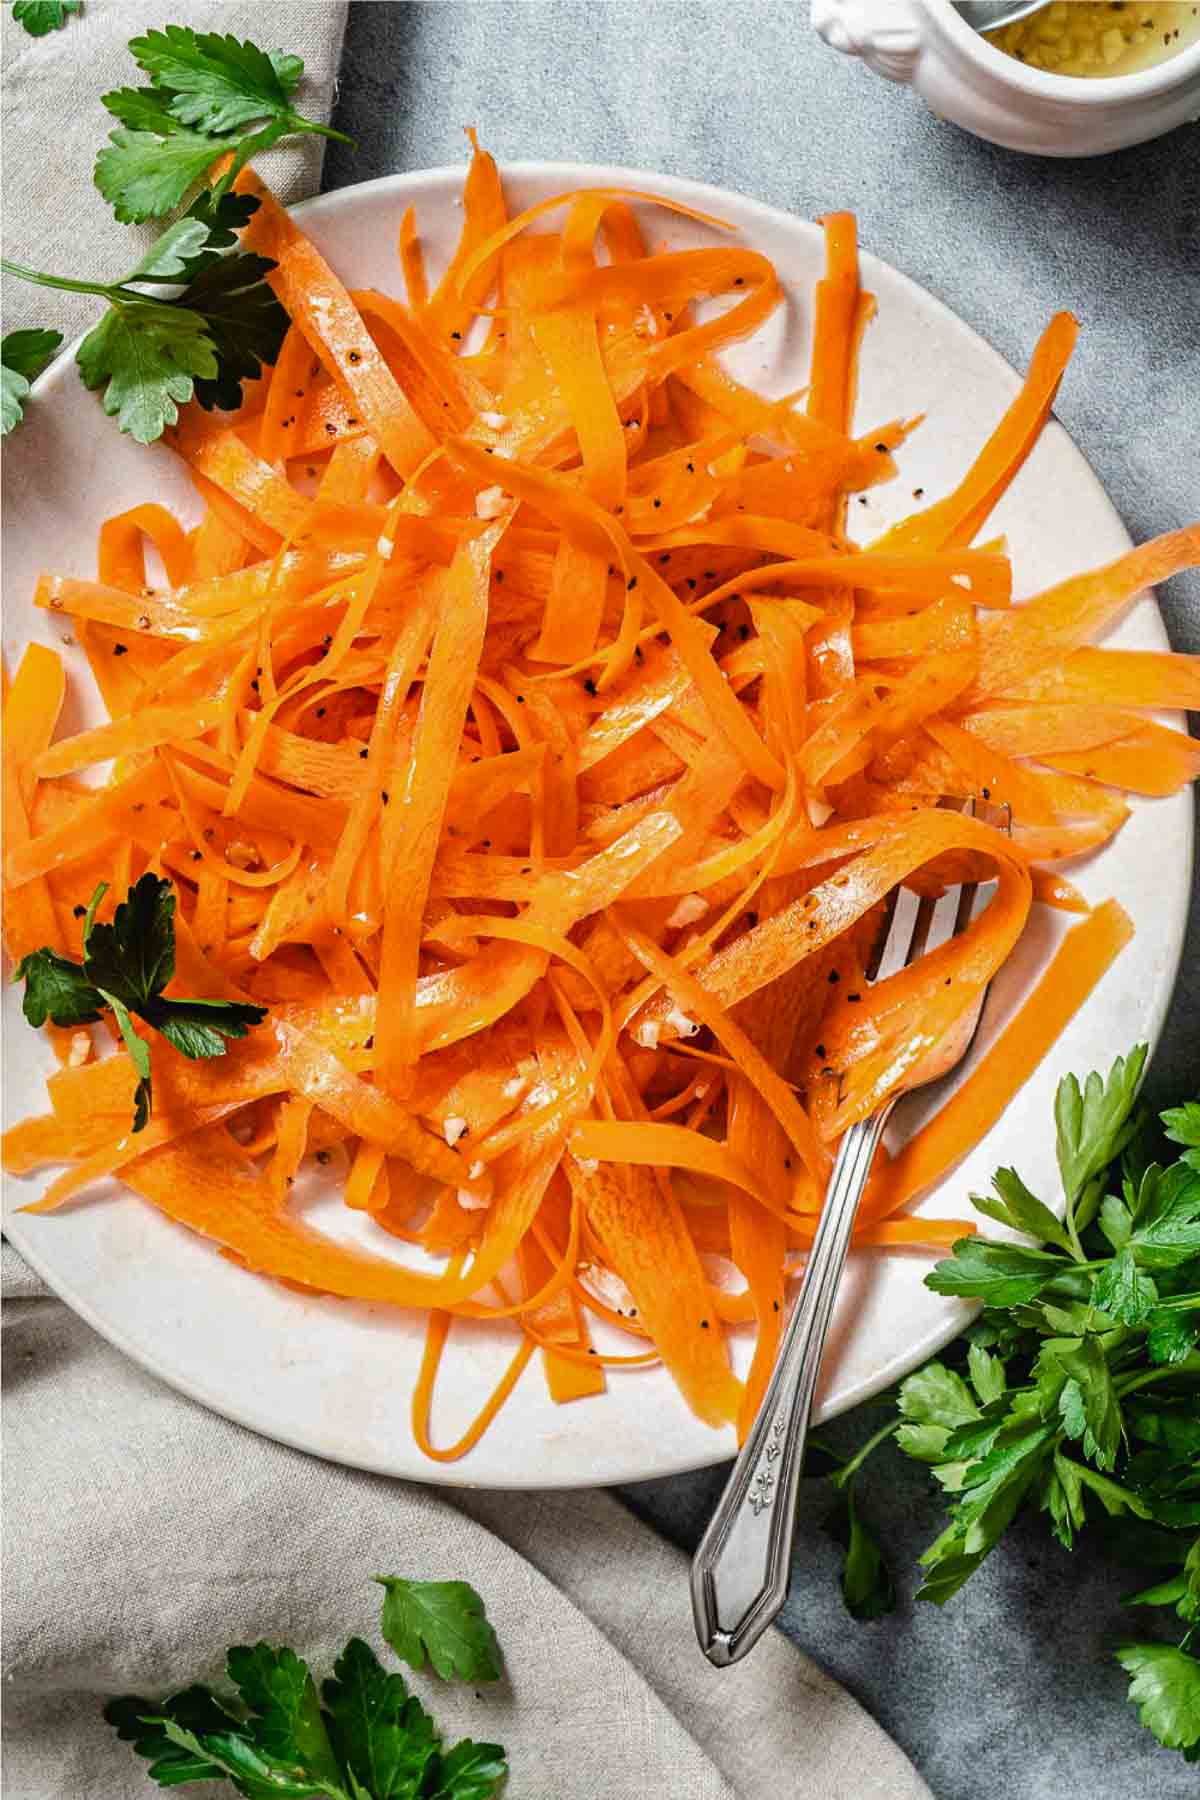 Dr. Peat Carrot Salad with coconut oil.